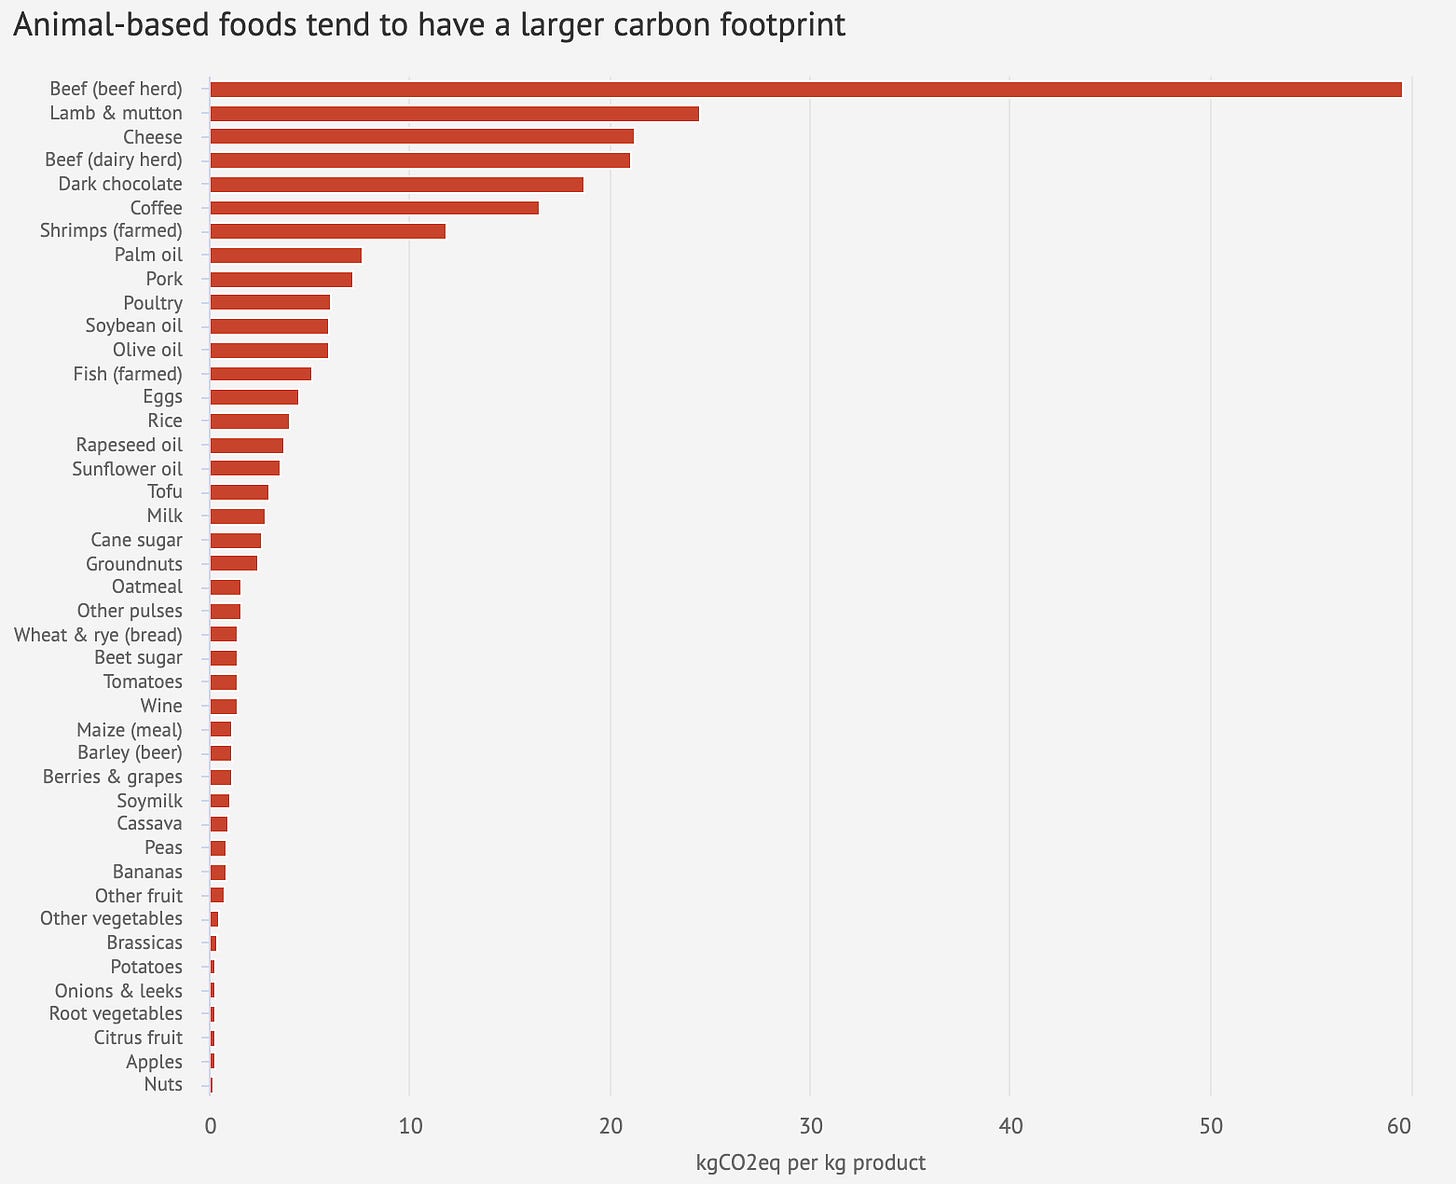 A chart showing that animal-based food tends to have a larger carbon footprint.